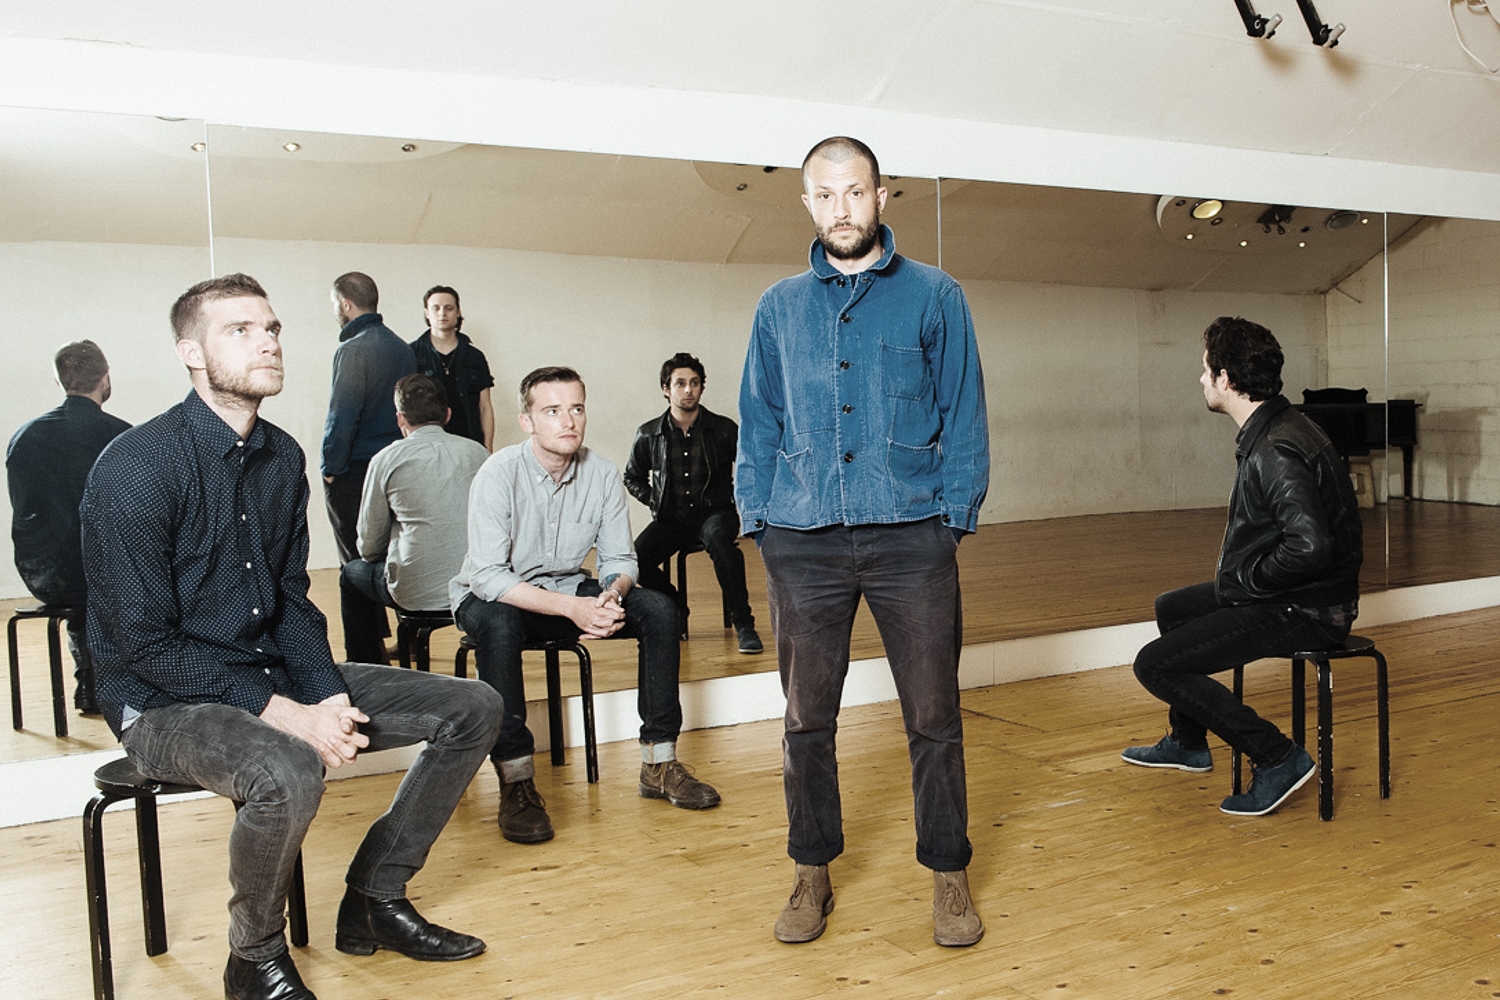 One thing’s for sure, we’re all getting older - The Maccabees call it quits